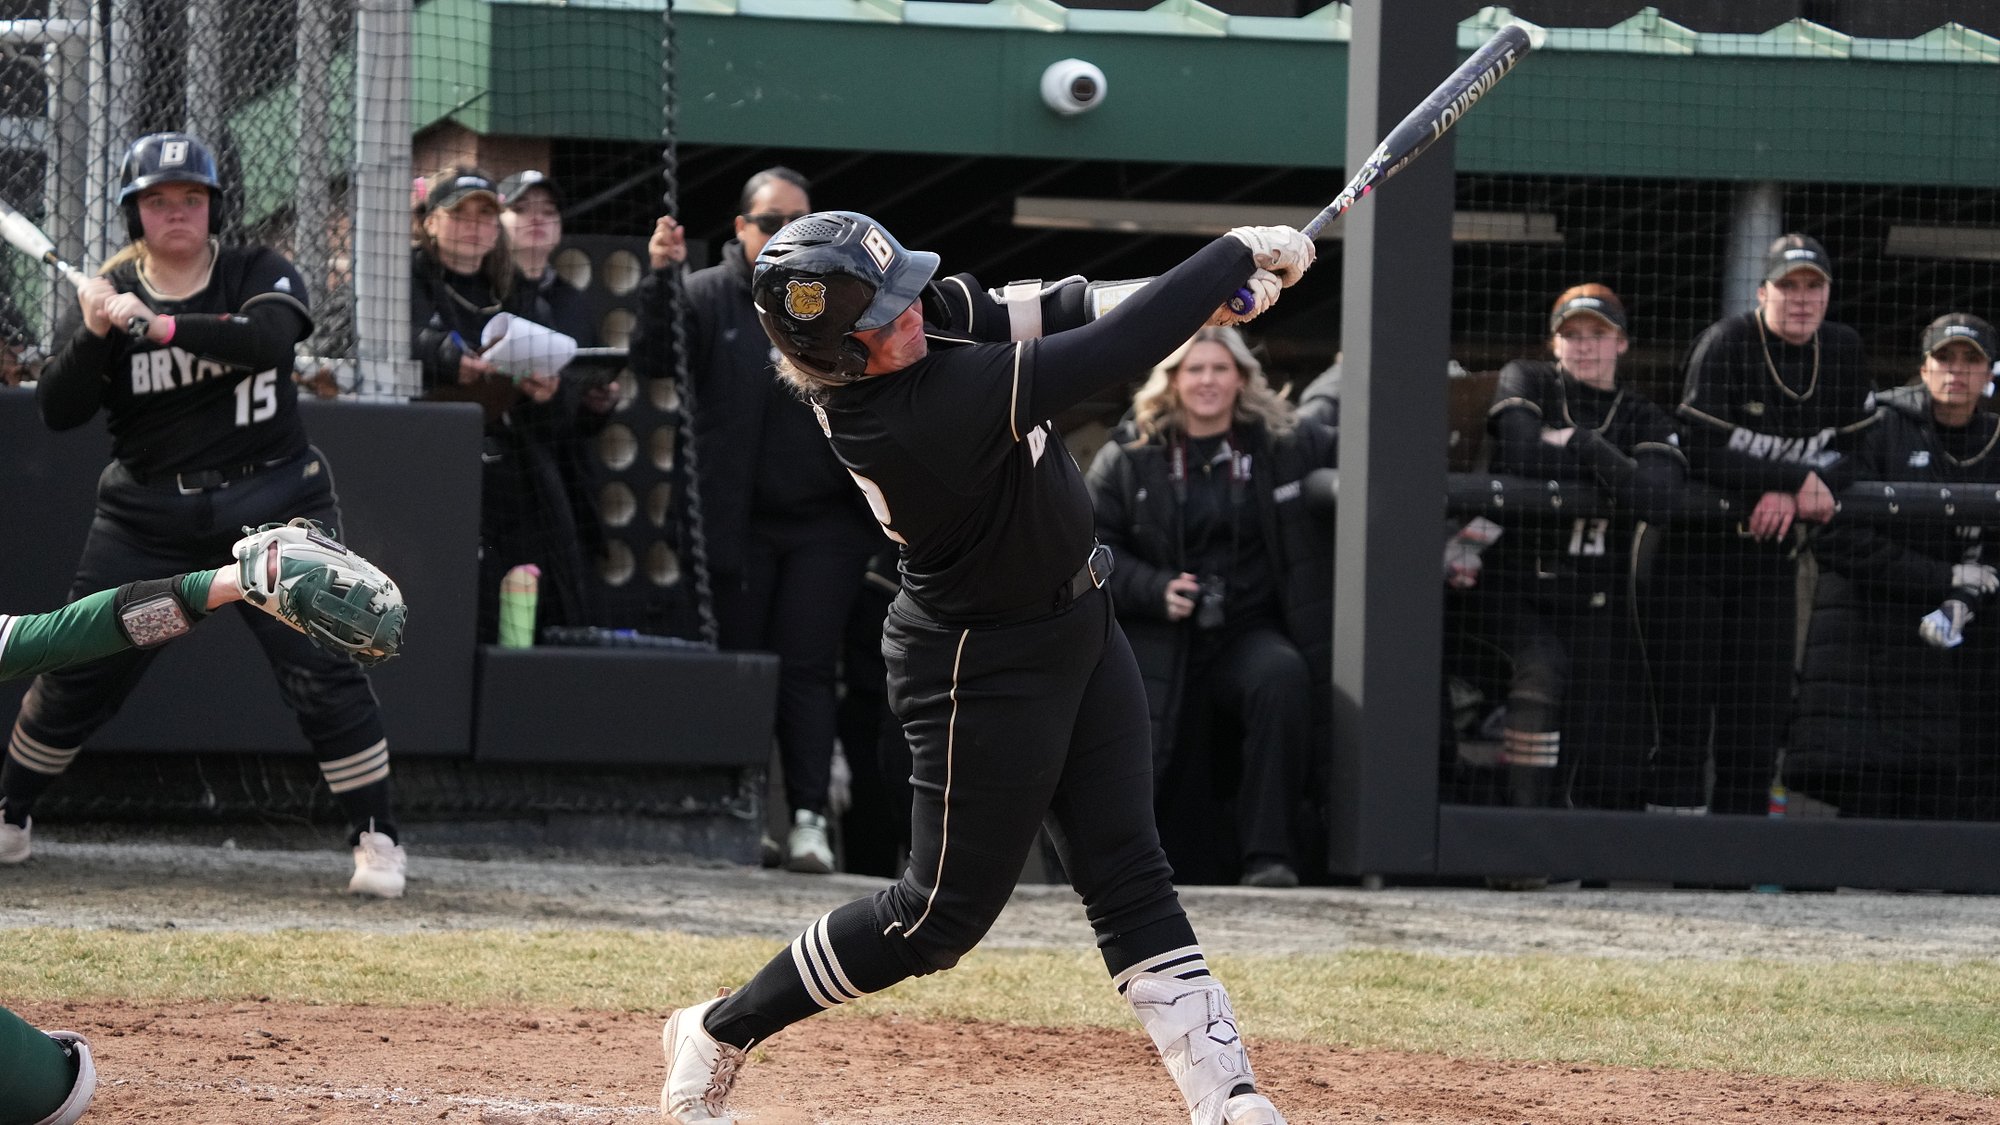 Marcel hits her 3rd HR of the weekend as the Bulldogs earn the sweep against UAlbany